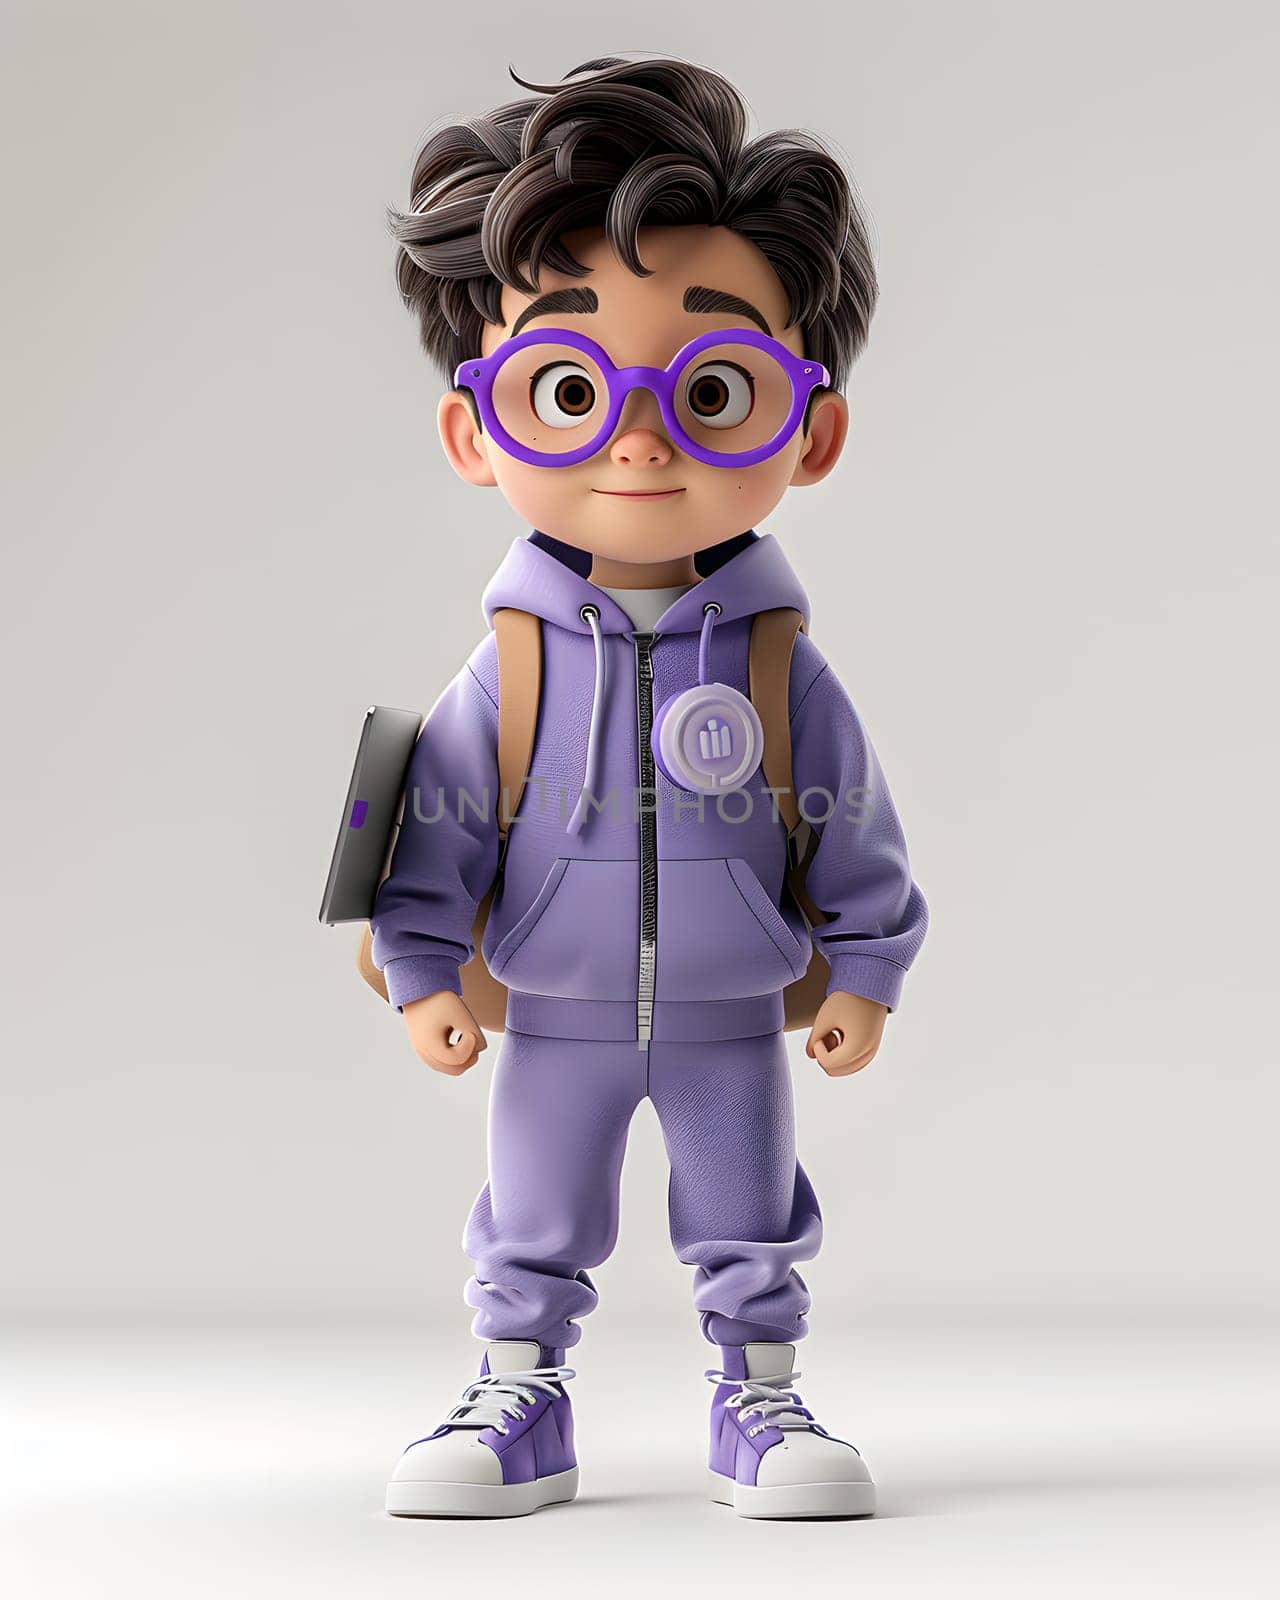 A cartoon boy in a purple hoodie and glasses is holding a book, he looks like a fictional character action figure with an electric blue toy sleeve and a toy gesture